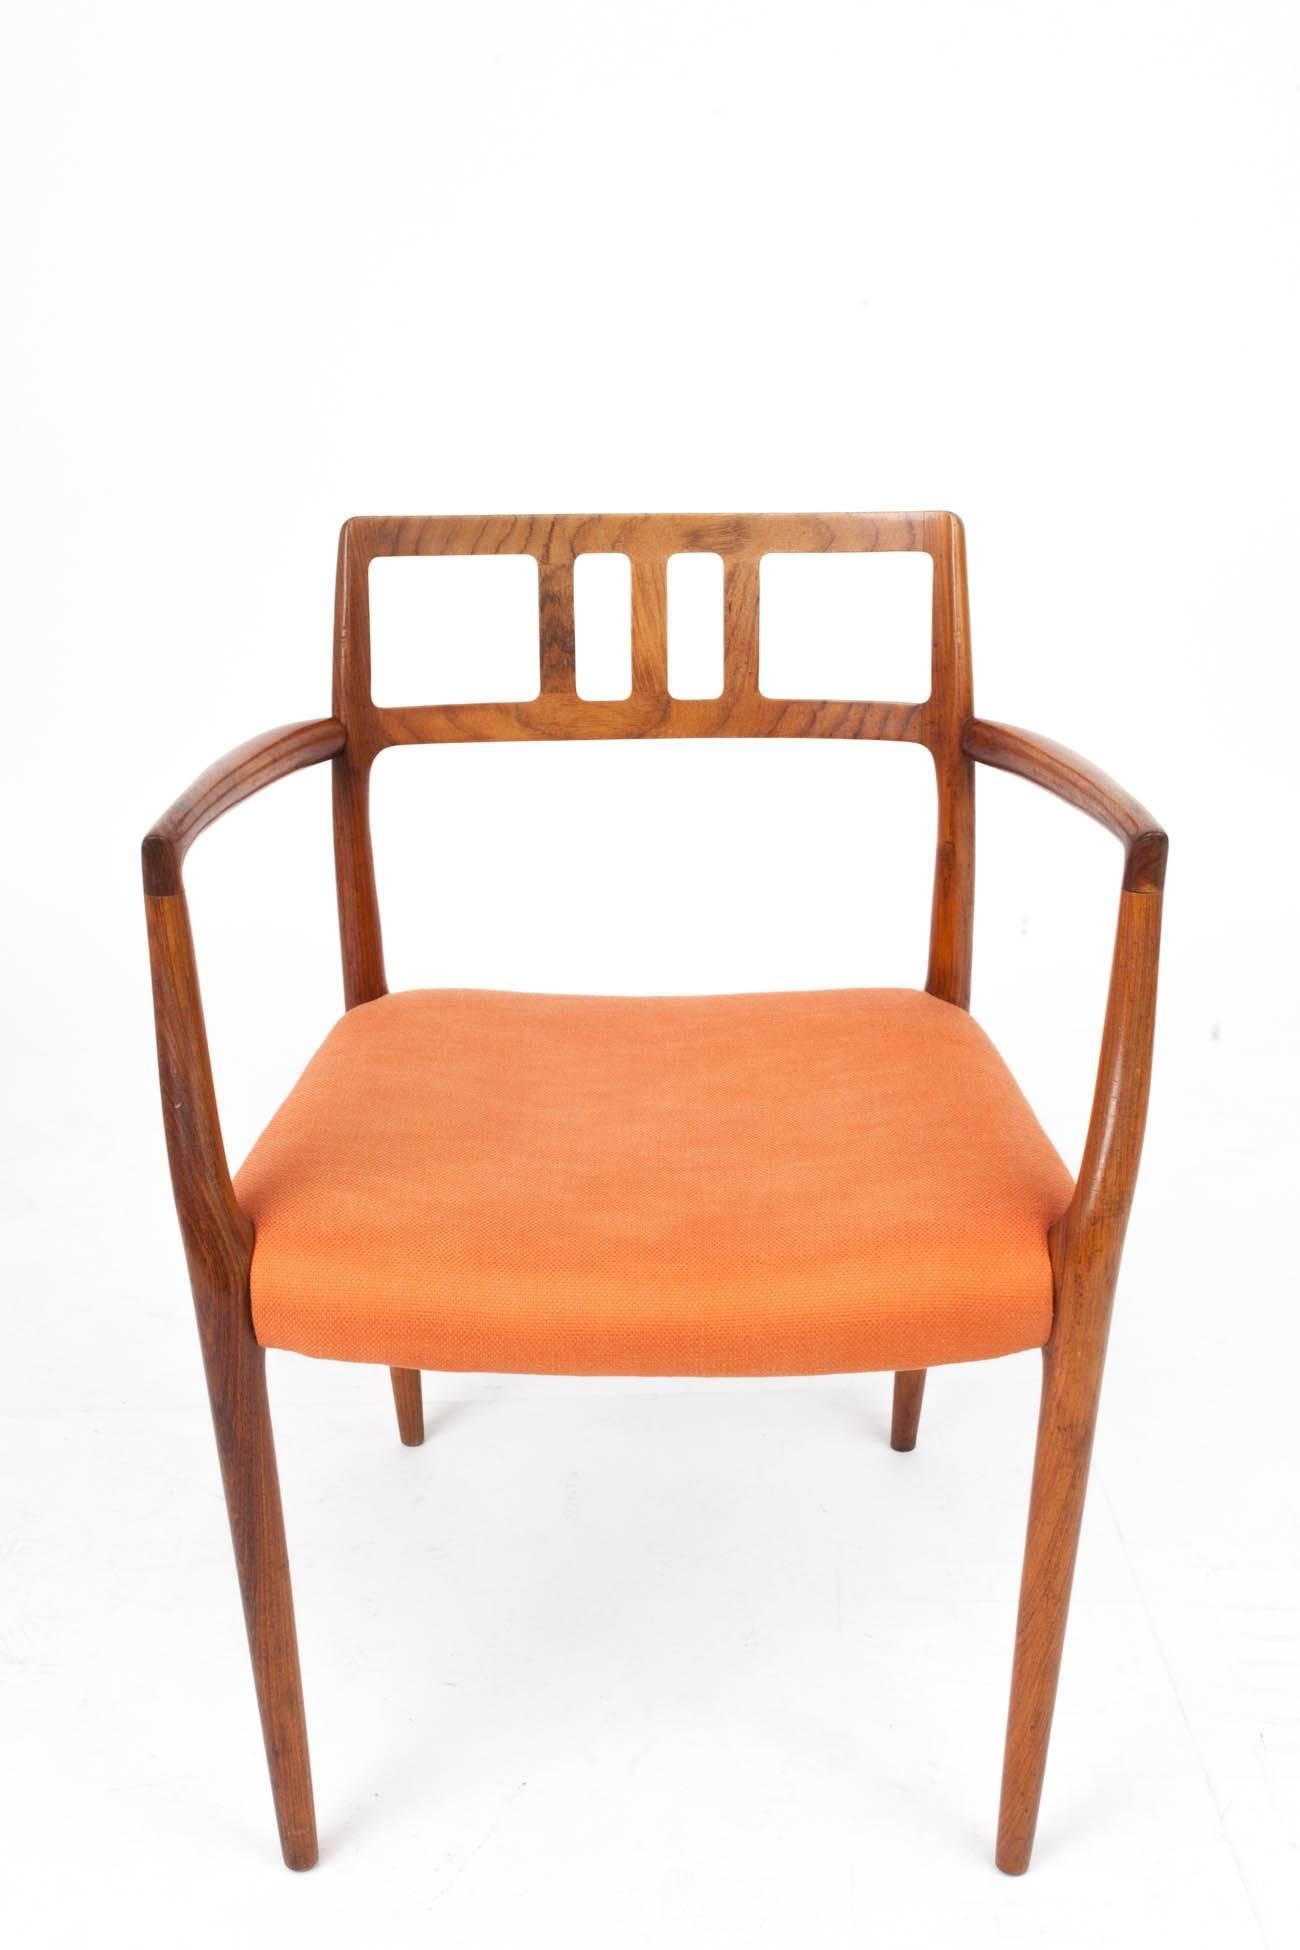 Niels Otto Møller (1922–1988)
Elegant Scandinavian Modern side chair by Niels Otto Møller with sinuous arms, tapered legs, and a comfortable, delicately curving back graced with a Bauhaus-inflected geometry. In teak with orange cotton upholstery.